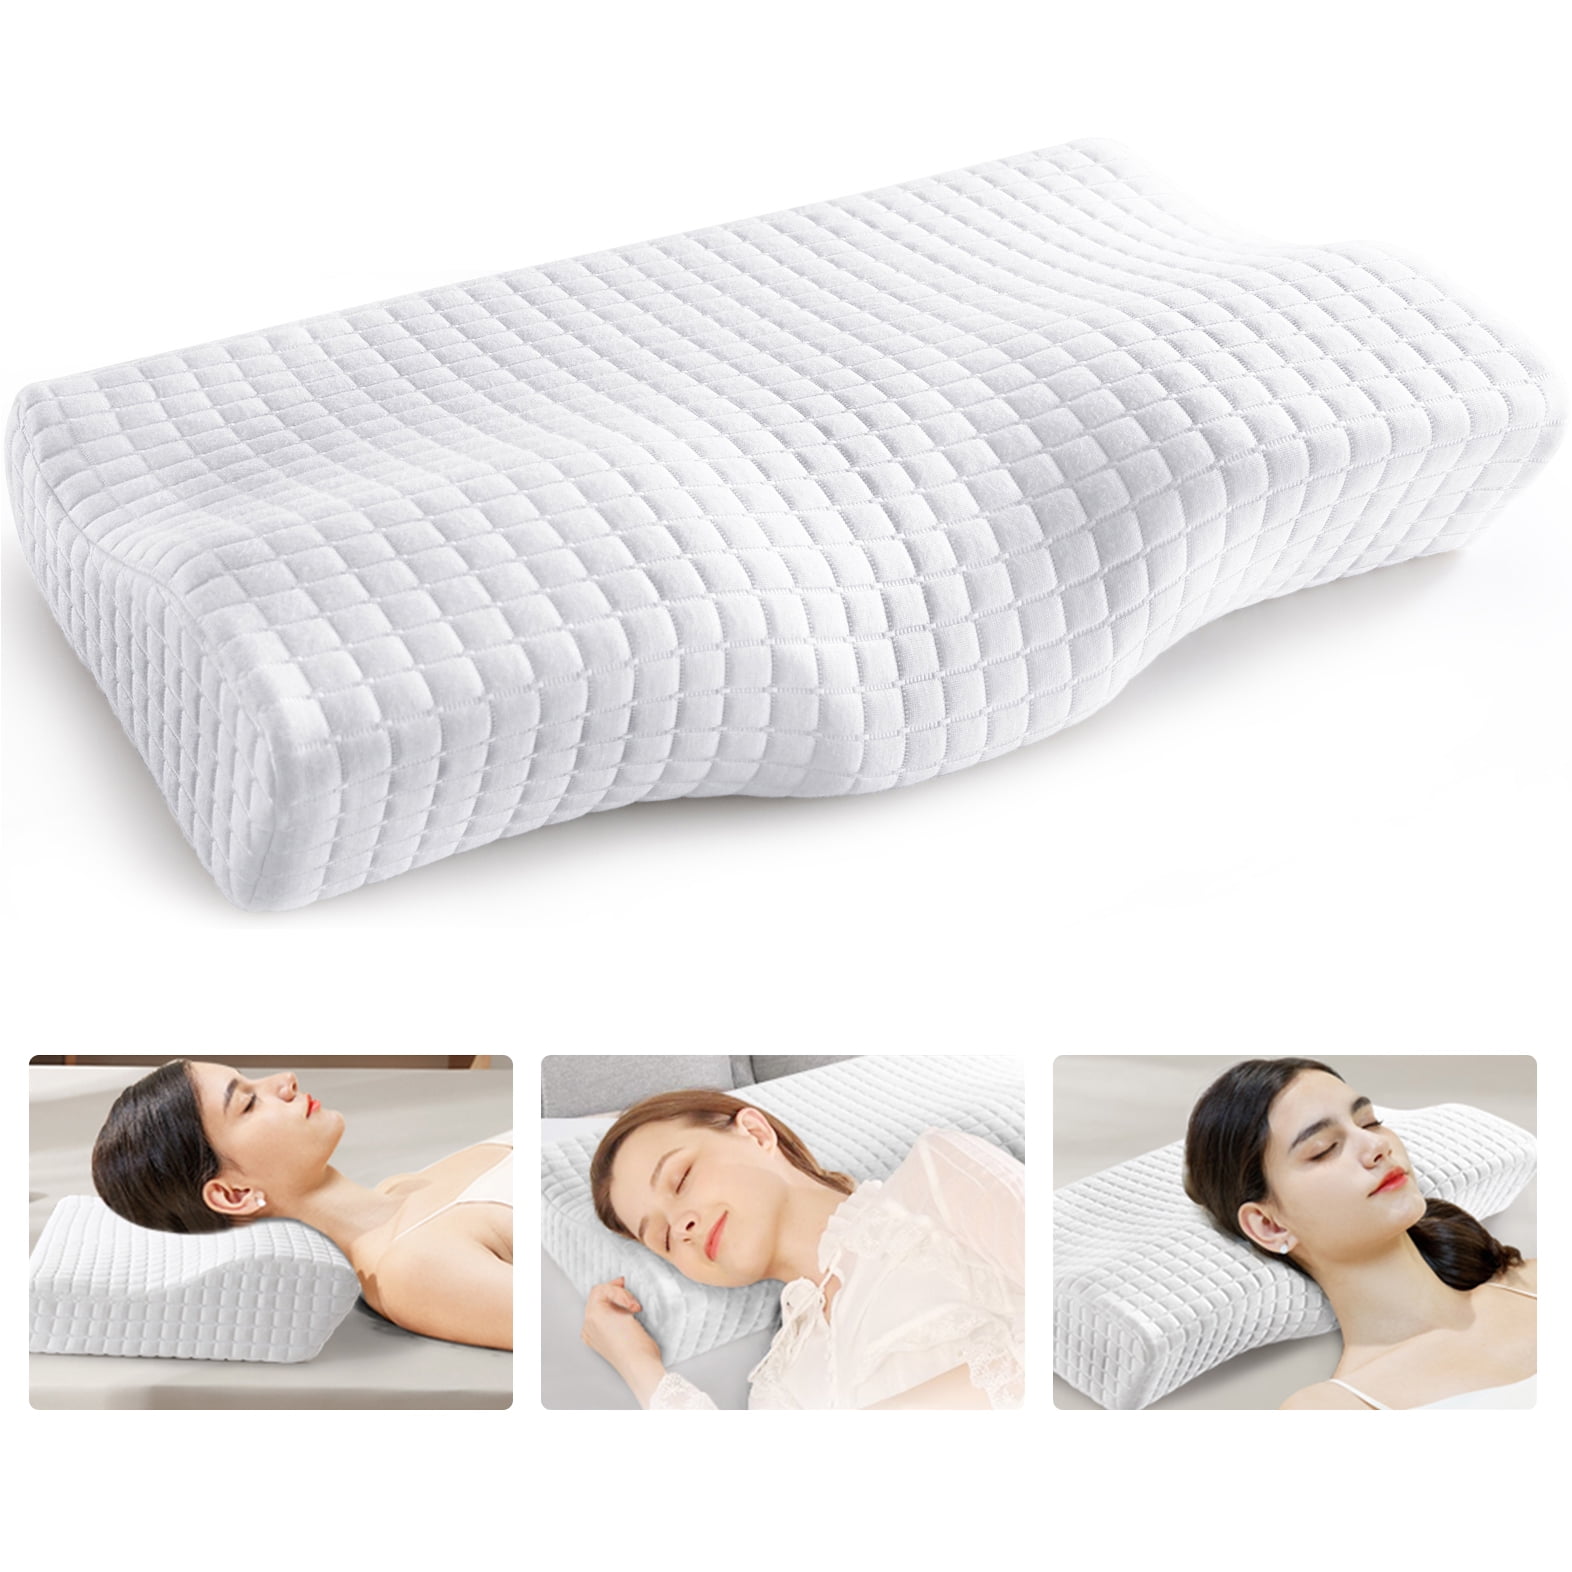 Cervical Pillow Orthopaedic Furniture Home or Outside High 15 cm washable 